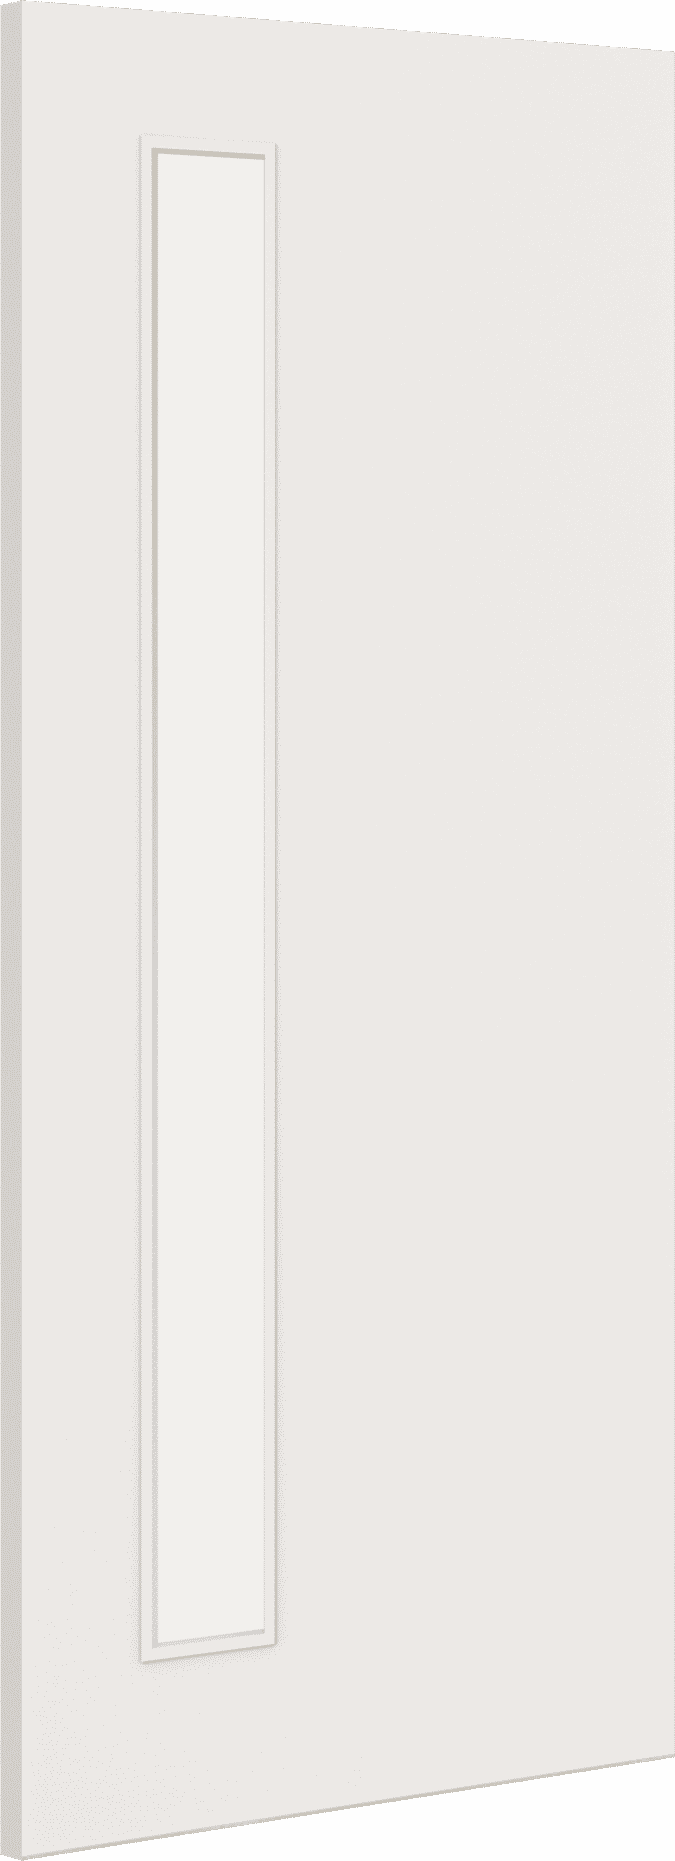 1981mm x 686mm x 44mm (27") Architectural Paint Grade White 06 Clear Glazed Fire Door Blank